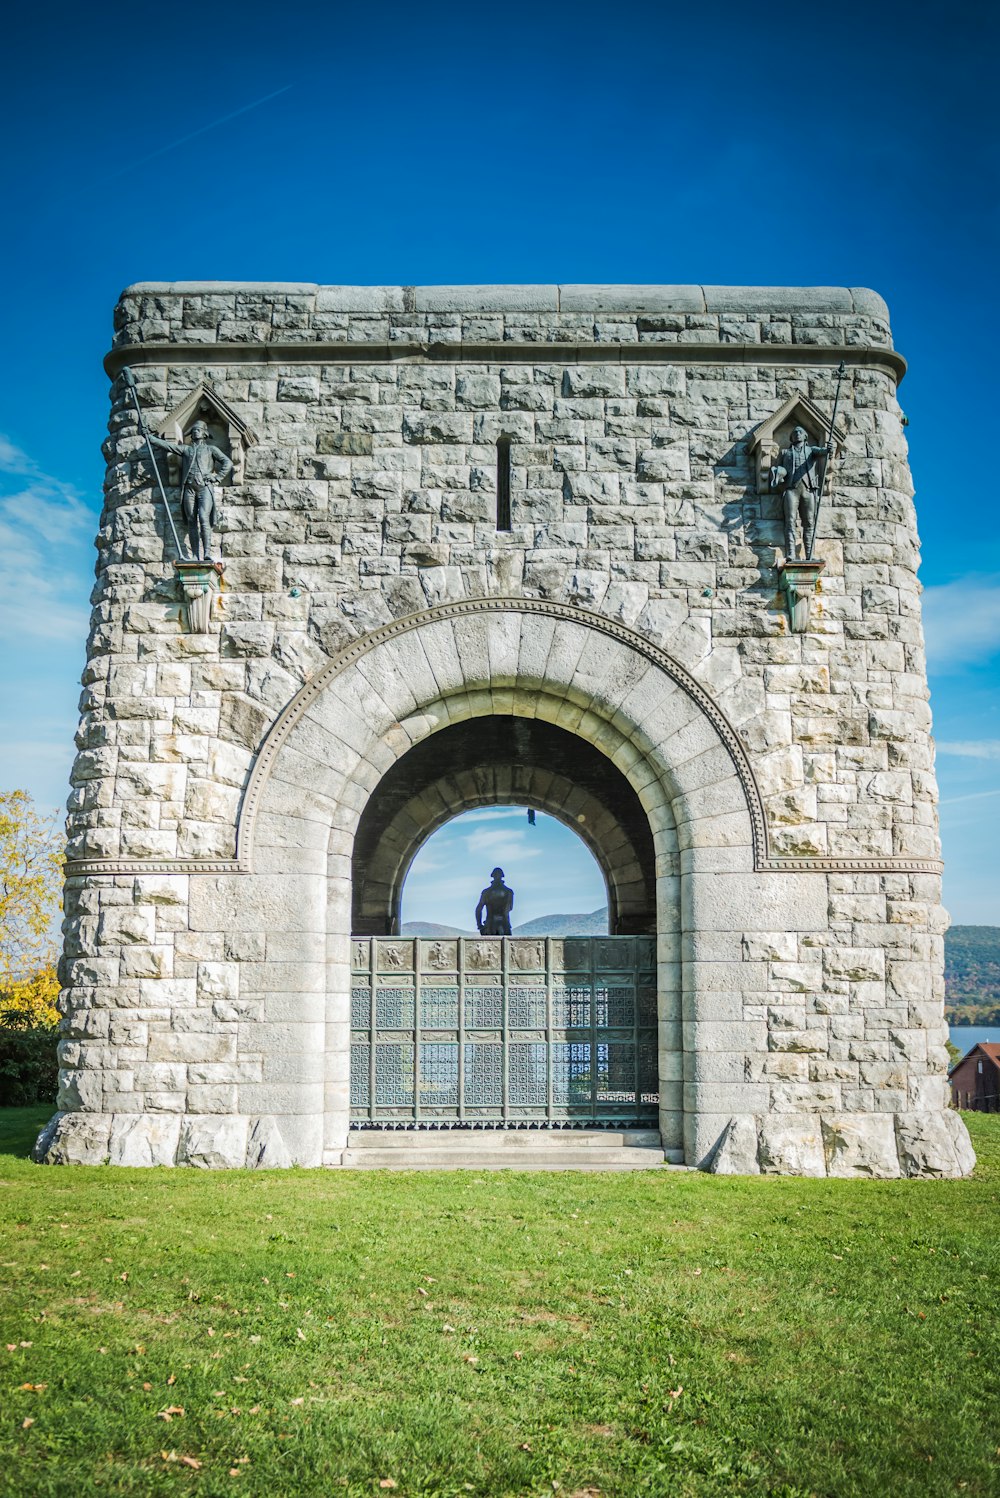 a stone archway with a clock on the top of it